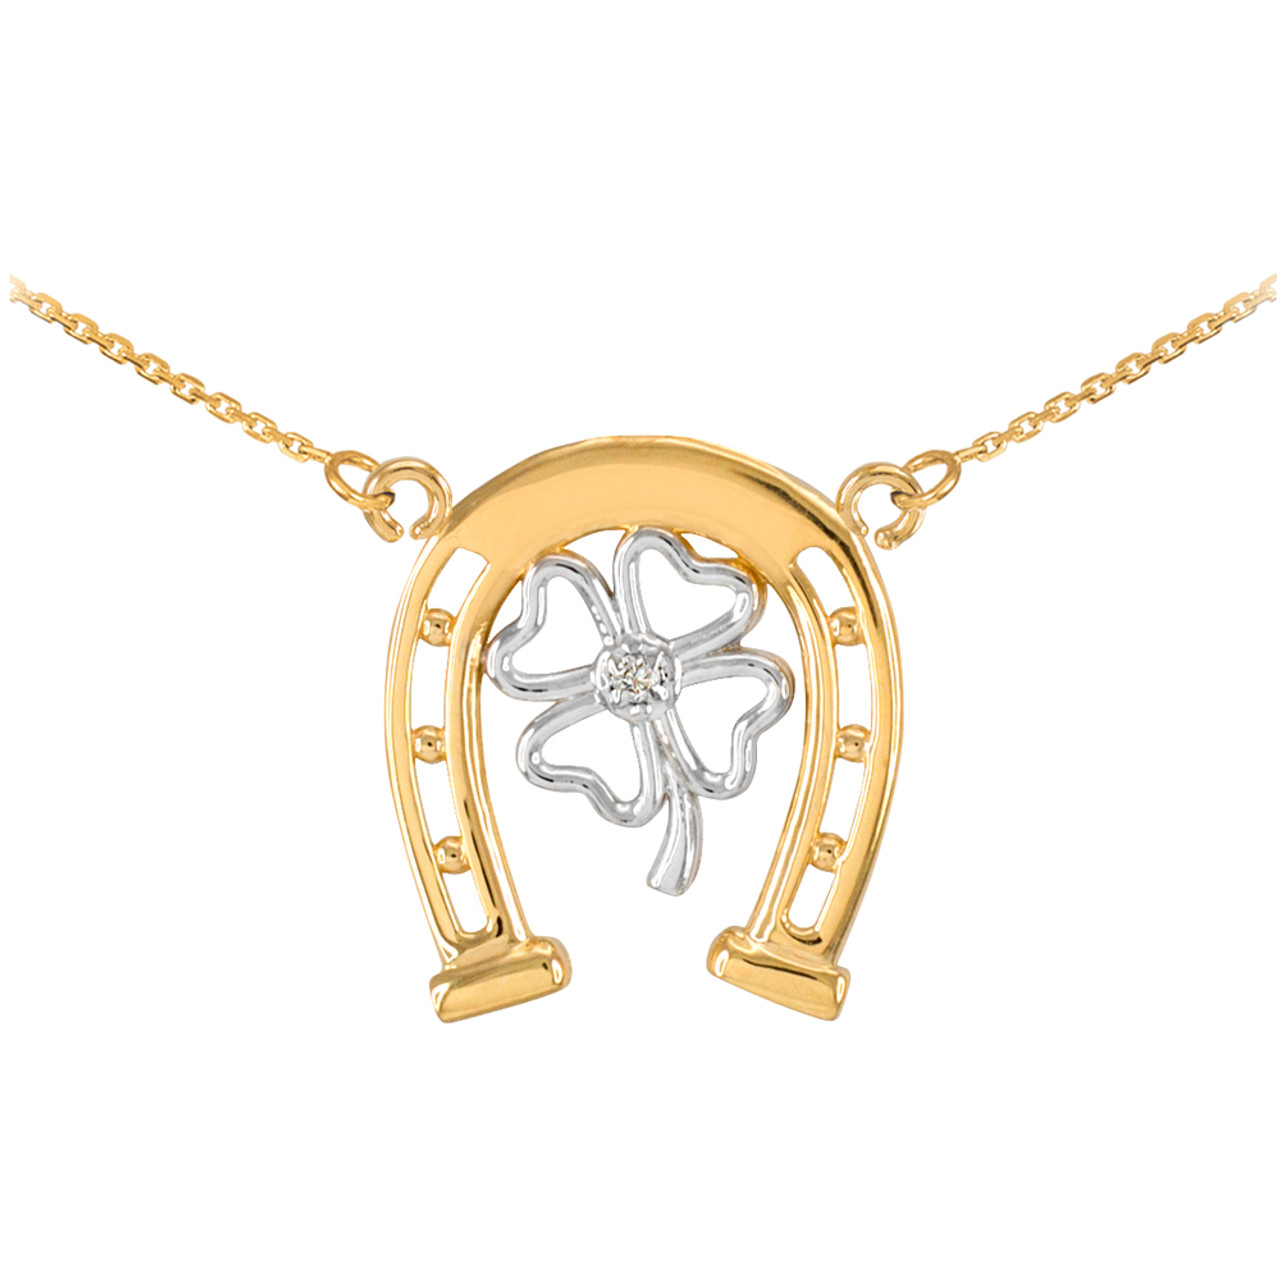 Gold Four Leaf Clover Necklace - Lucky Everyday Necklace